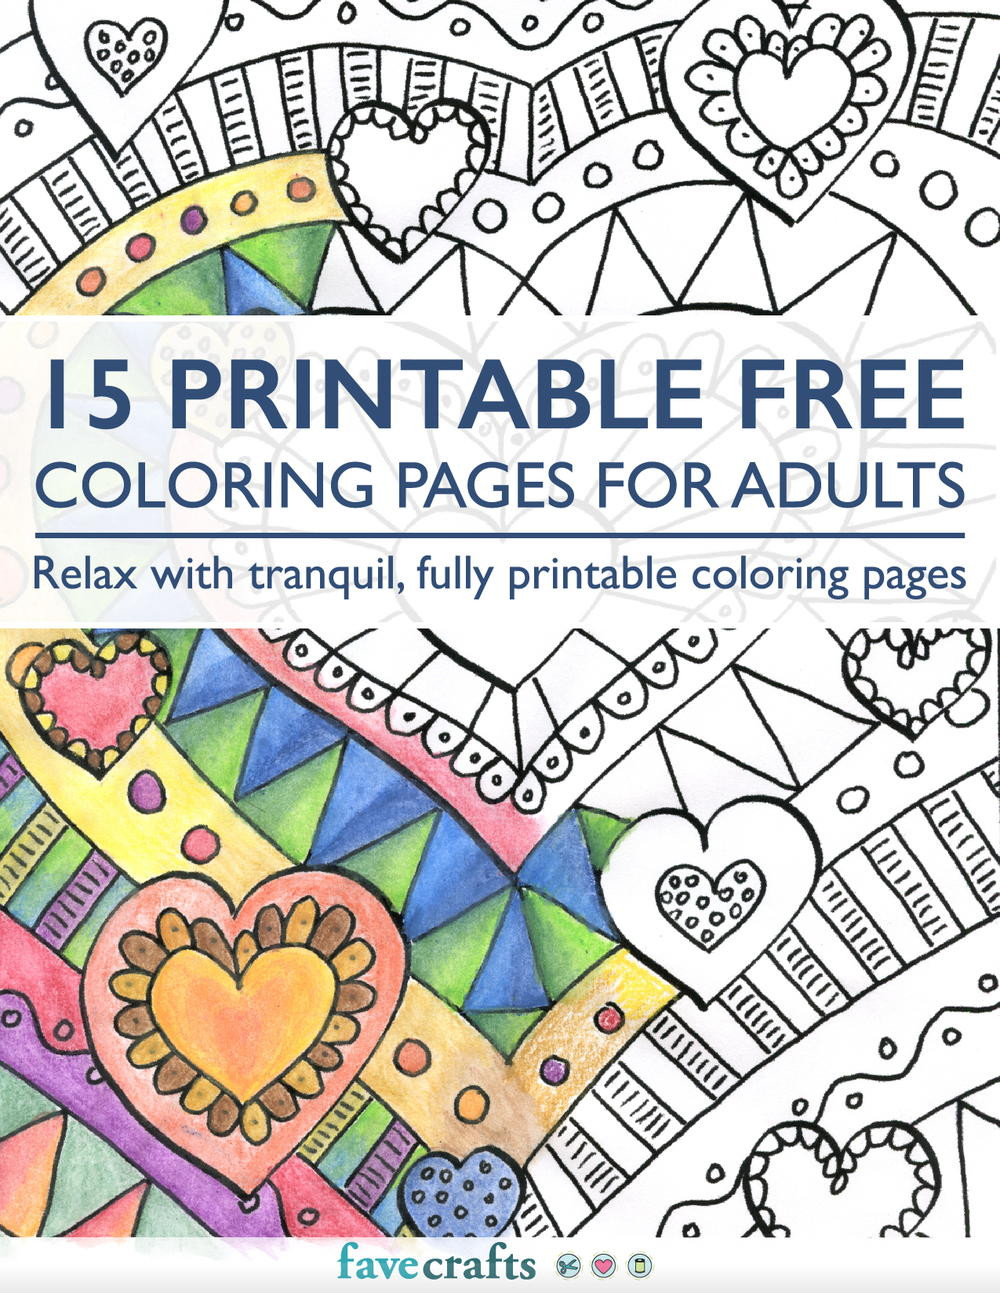 Coloring Pages For Adults Free Printable
 15 Printable Free Coloring Pages for Adults [PDF